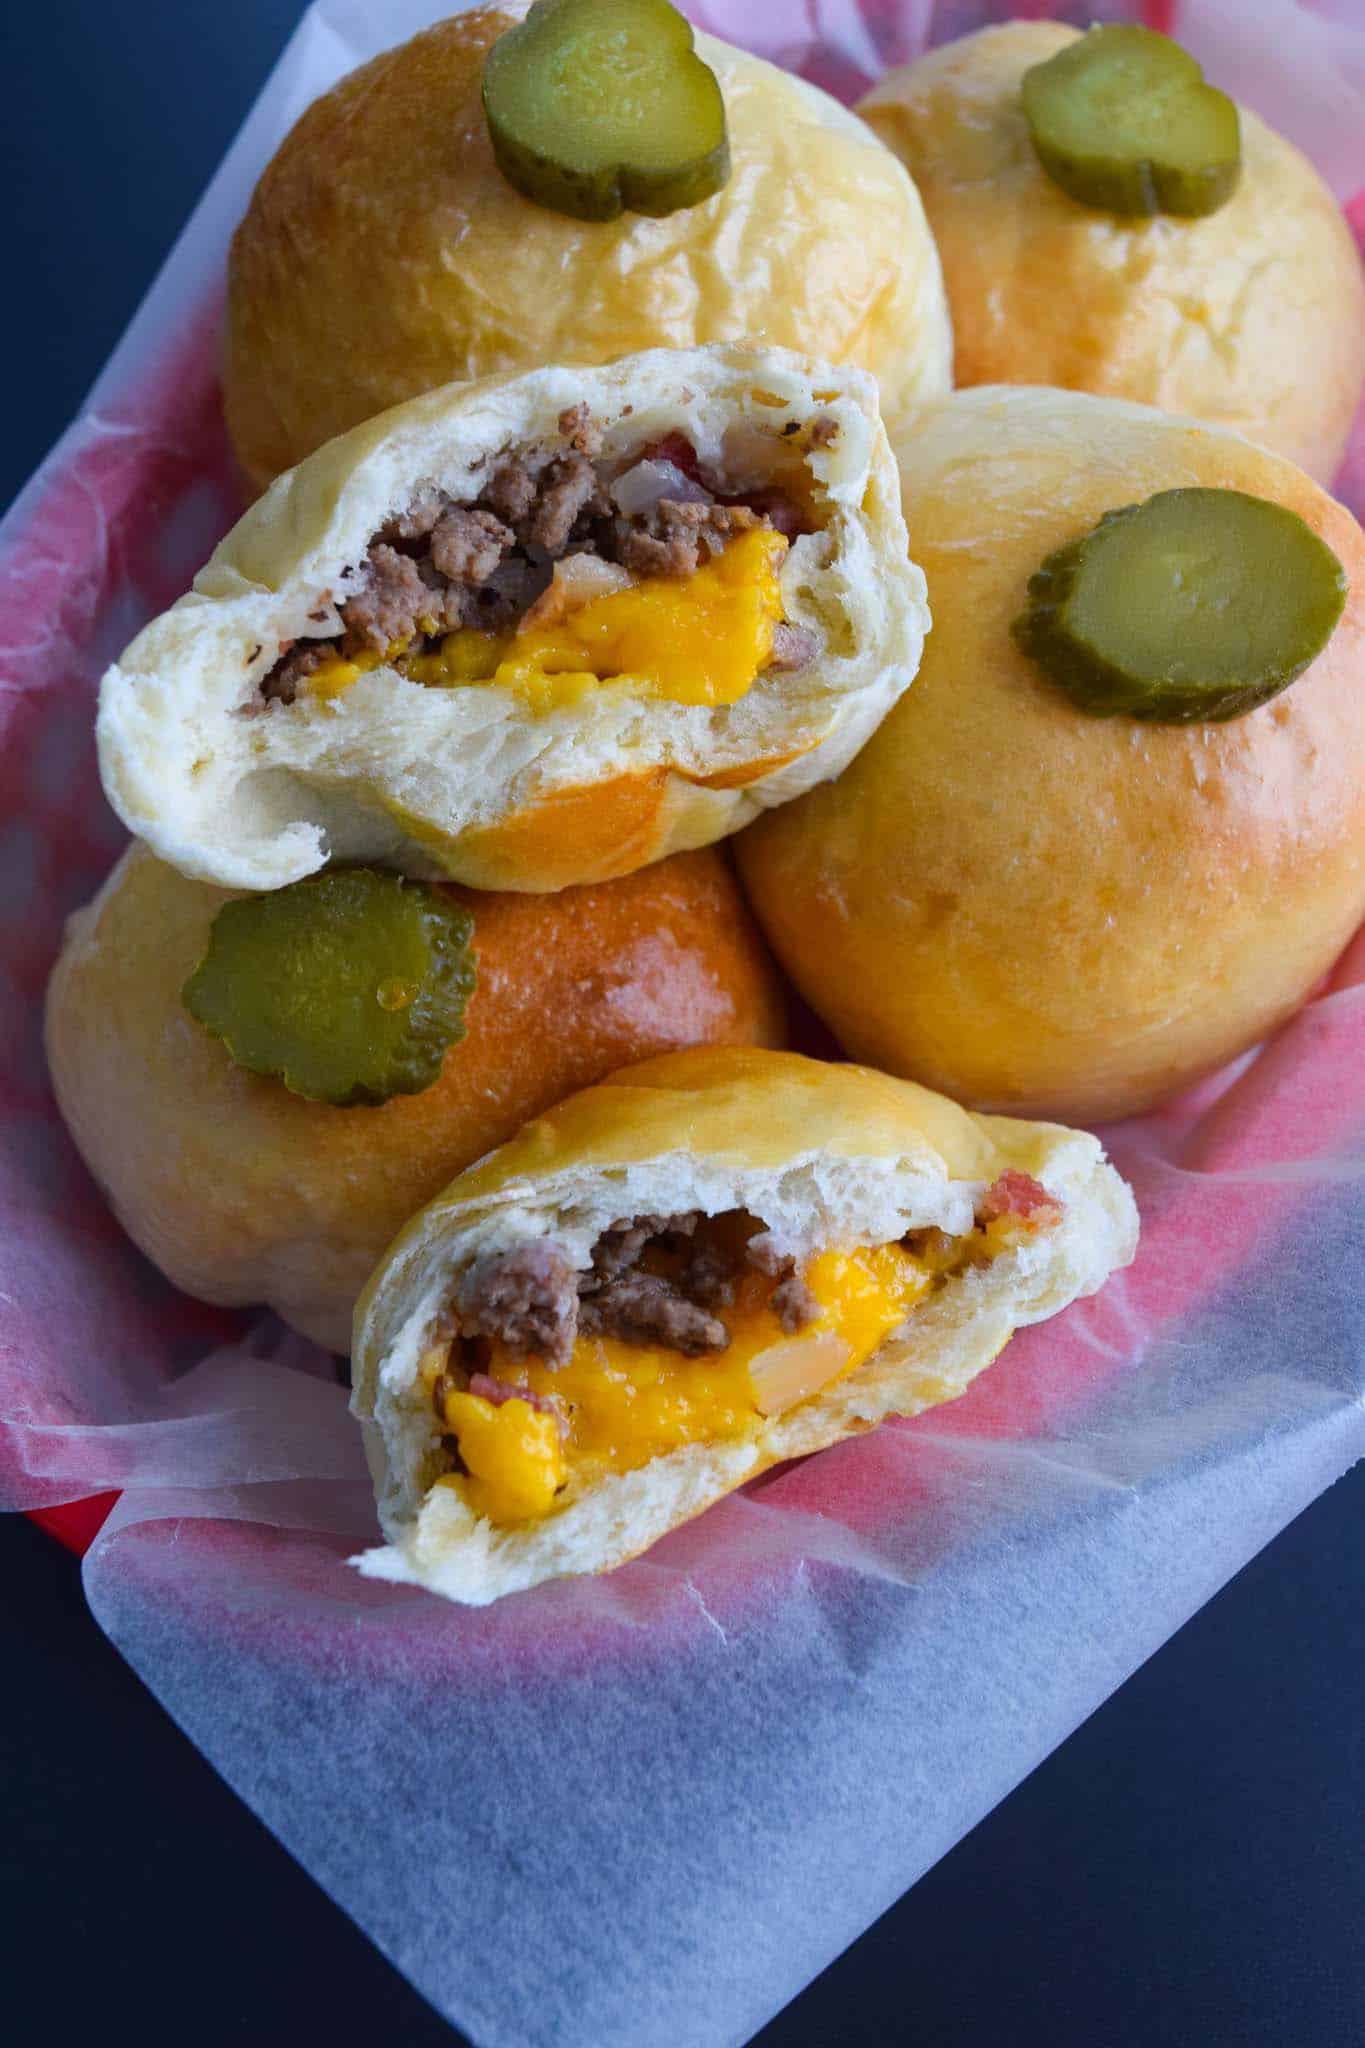 Bacon Cheeseburger Bombs cut in half to show cheesy inside close up view